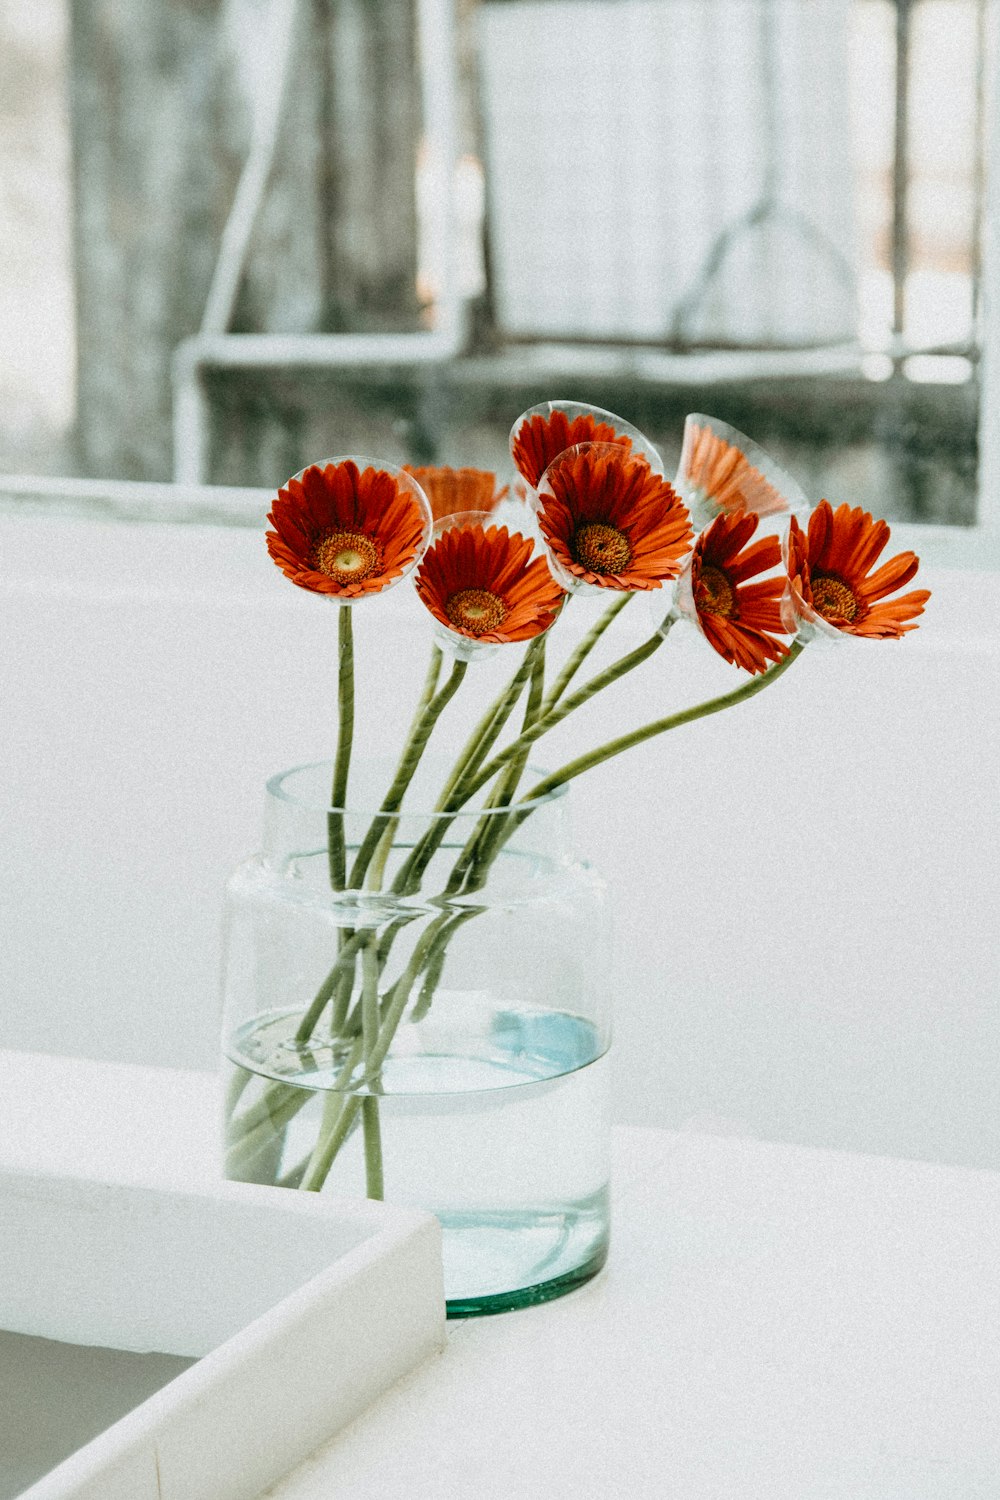 a glass vase filled with water and orange flowers